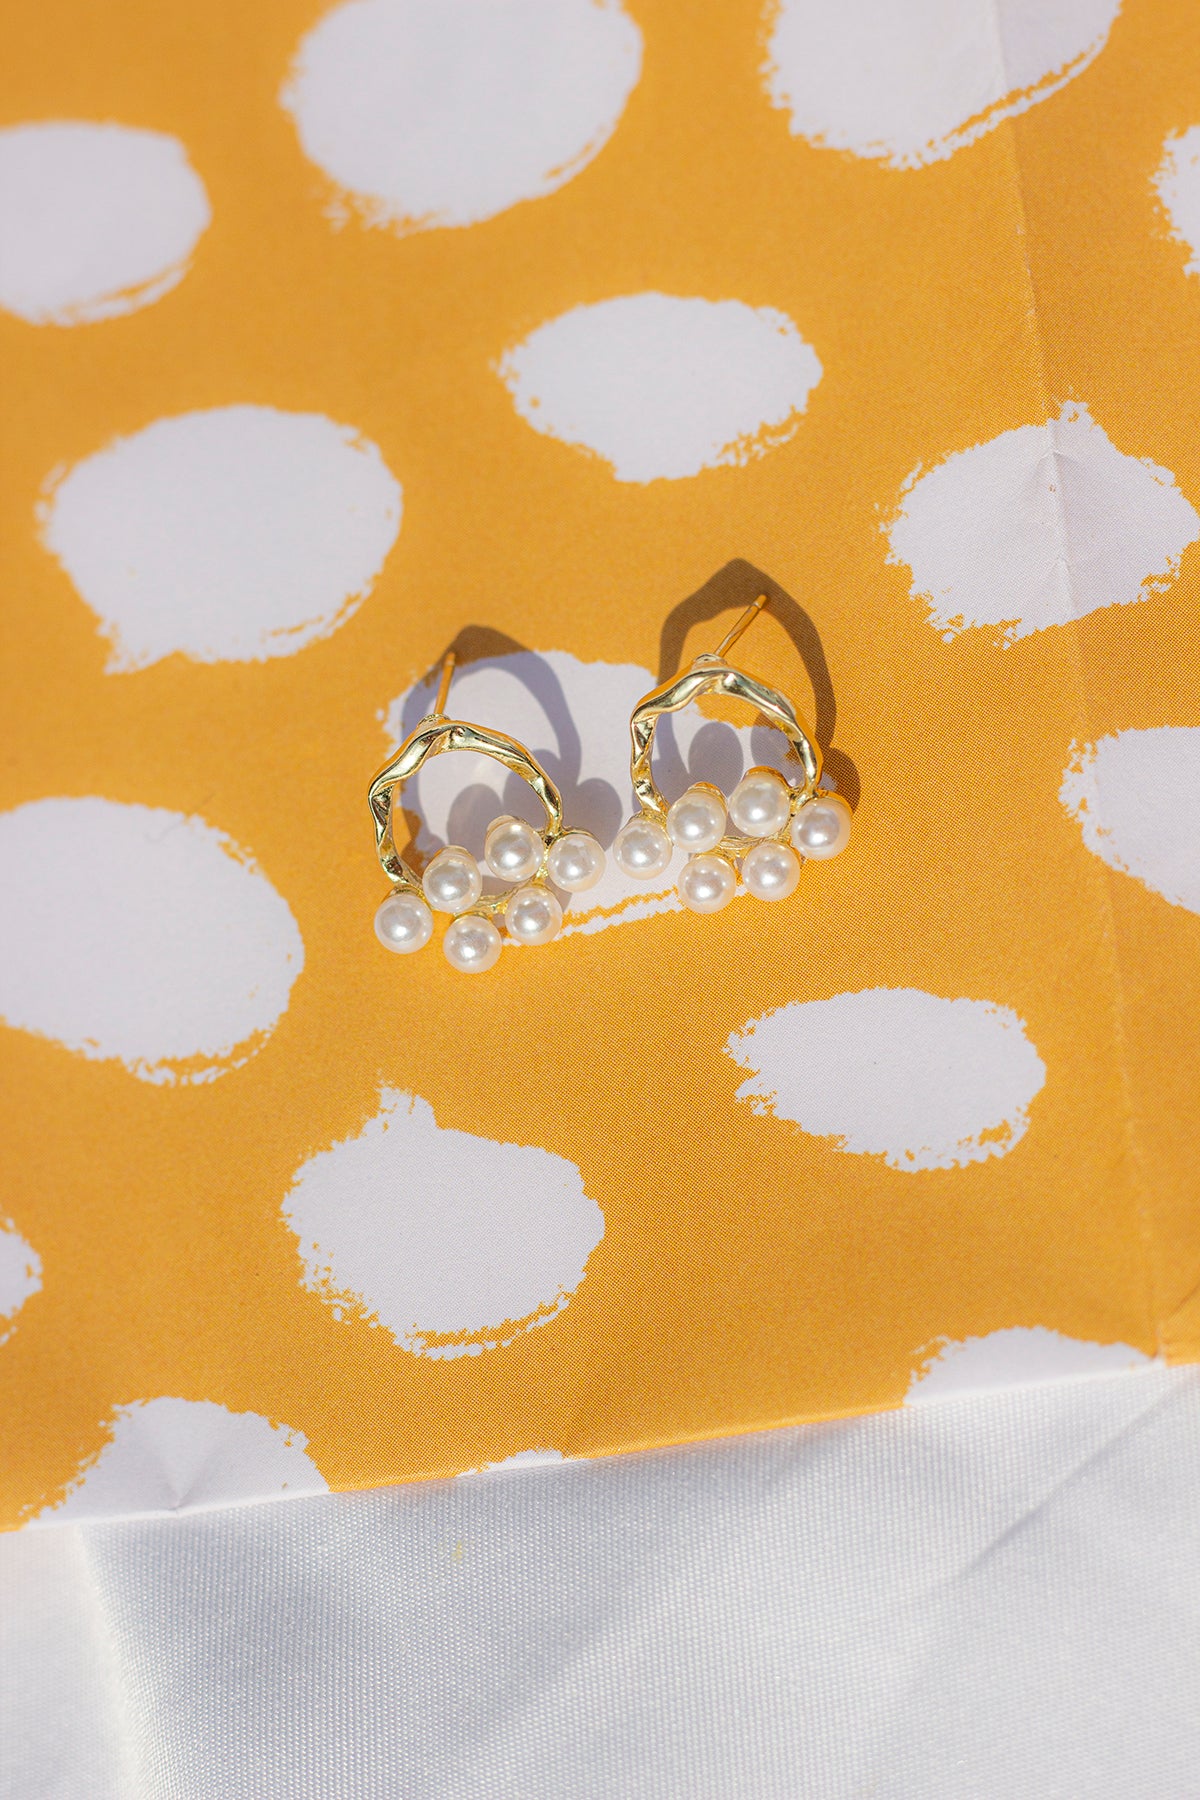 Gold Tone Circle Stud with Pearl Cluster - Sugar + Style